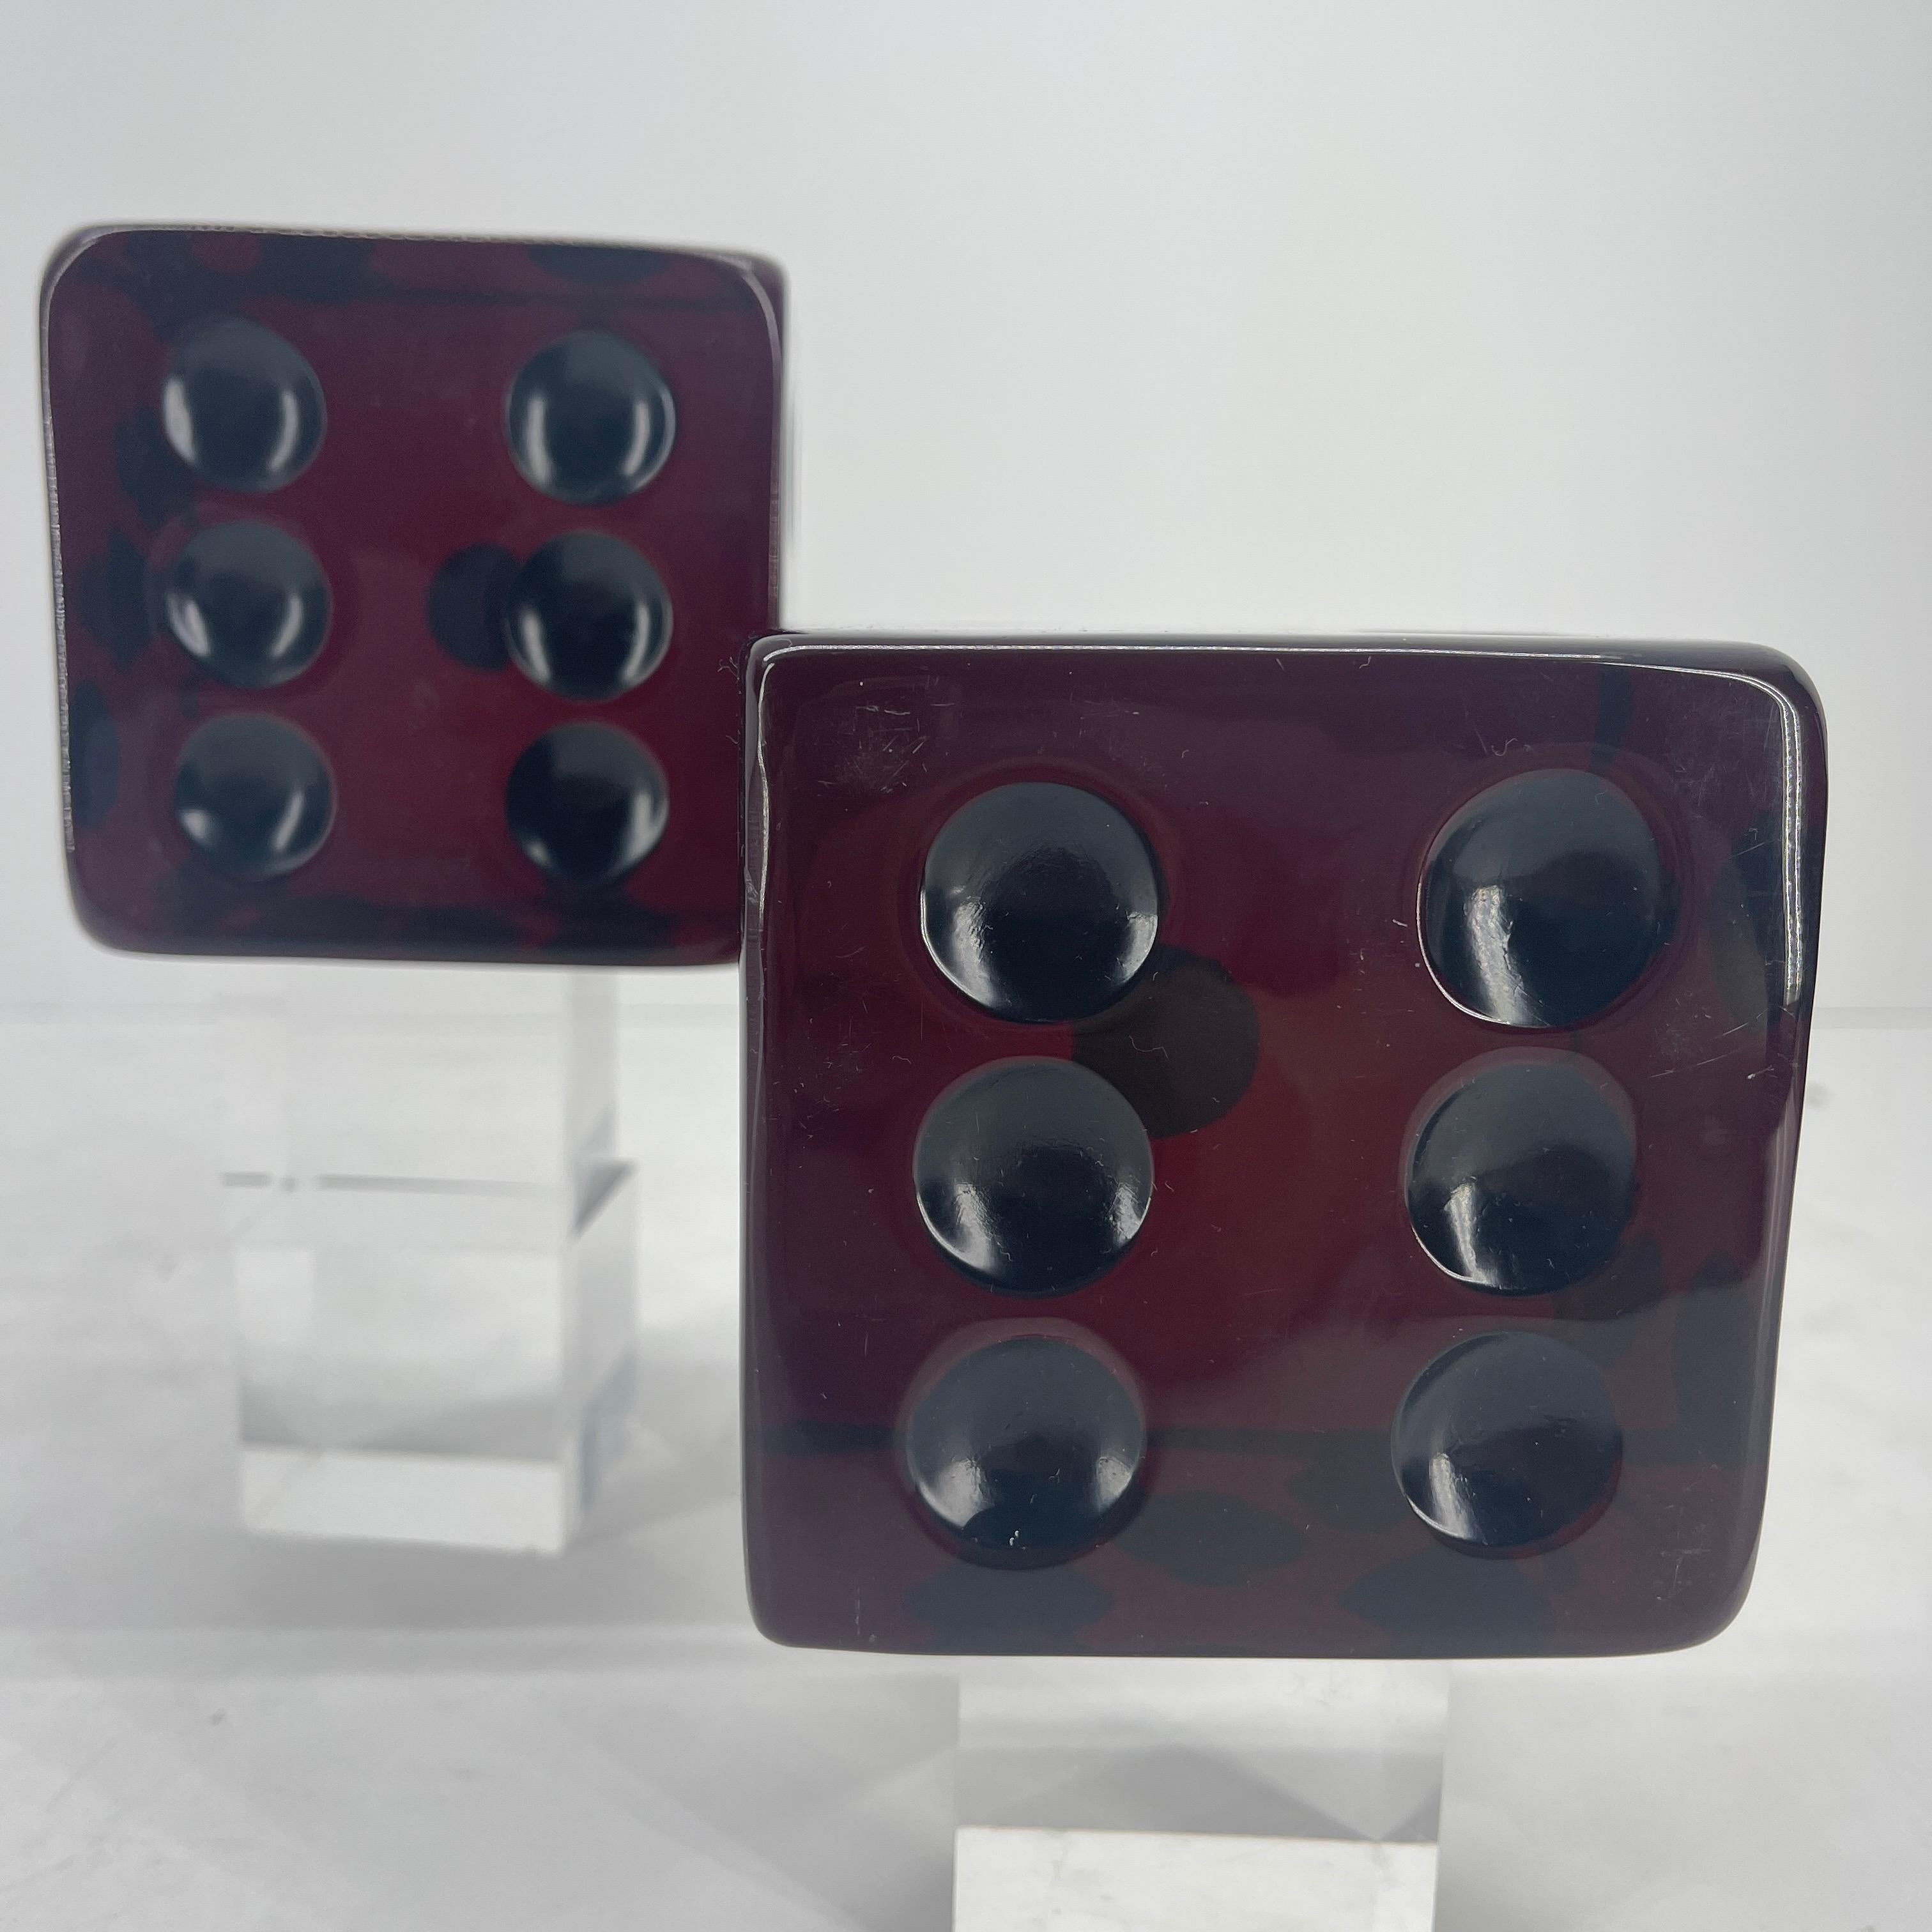 Feast your eyes on this glorious oxblood red pair of acrylic dice by Charles Hollis. These are spectacular when the light hits them, as they glow in burgundy tones. Perfect for accent pieces on a coffee table or as bookends. In very good vintage